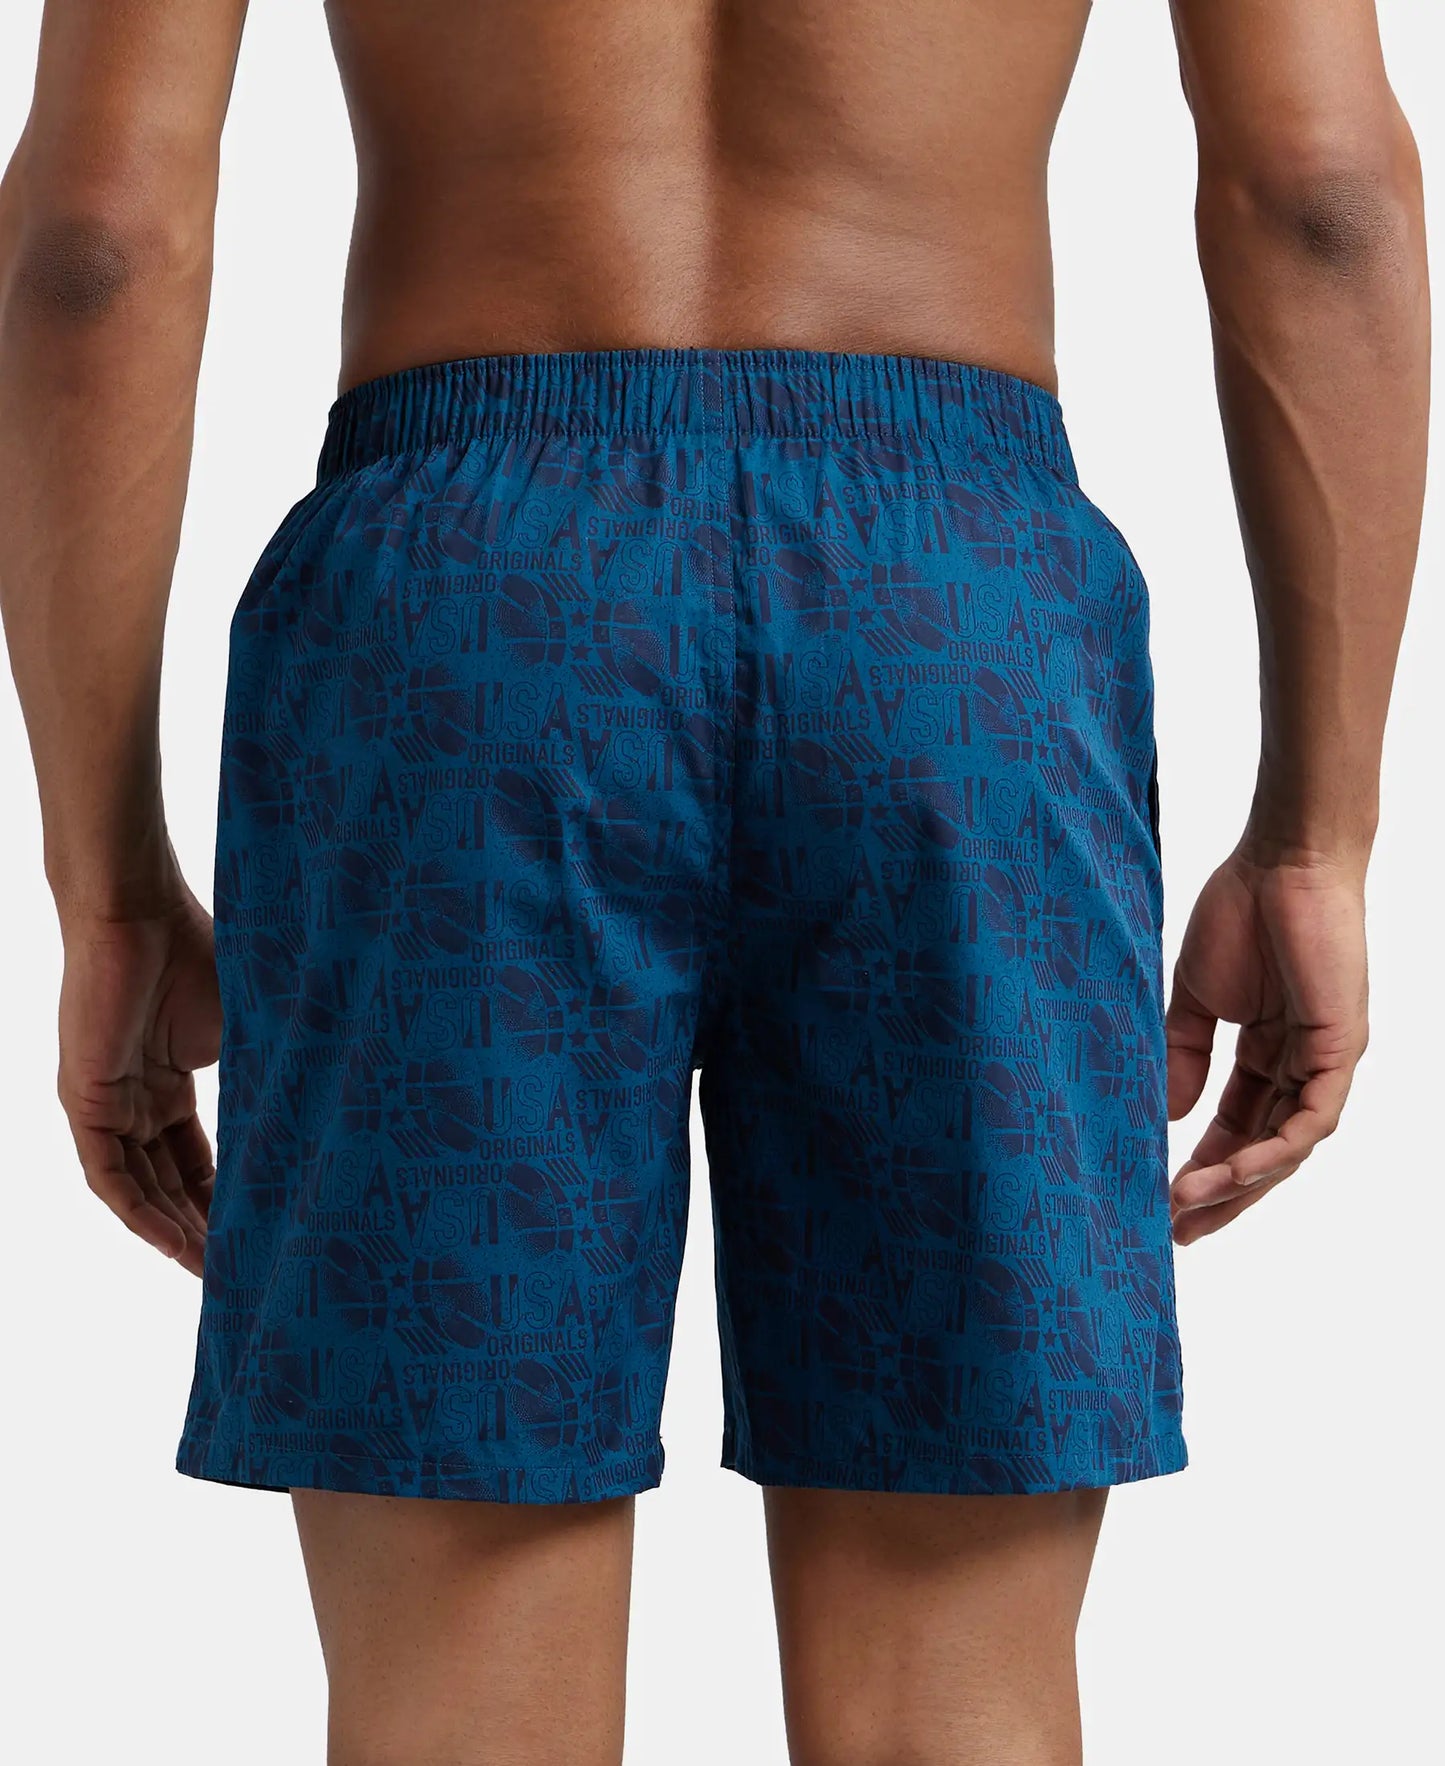 Super Combed Mercerized Cotton Woven Printed Boxer Shorts with Side Pocket - Nickel & Seaport Teal-6